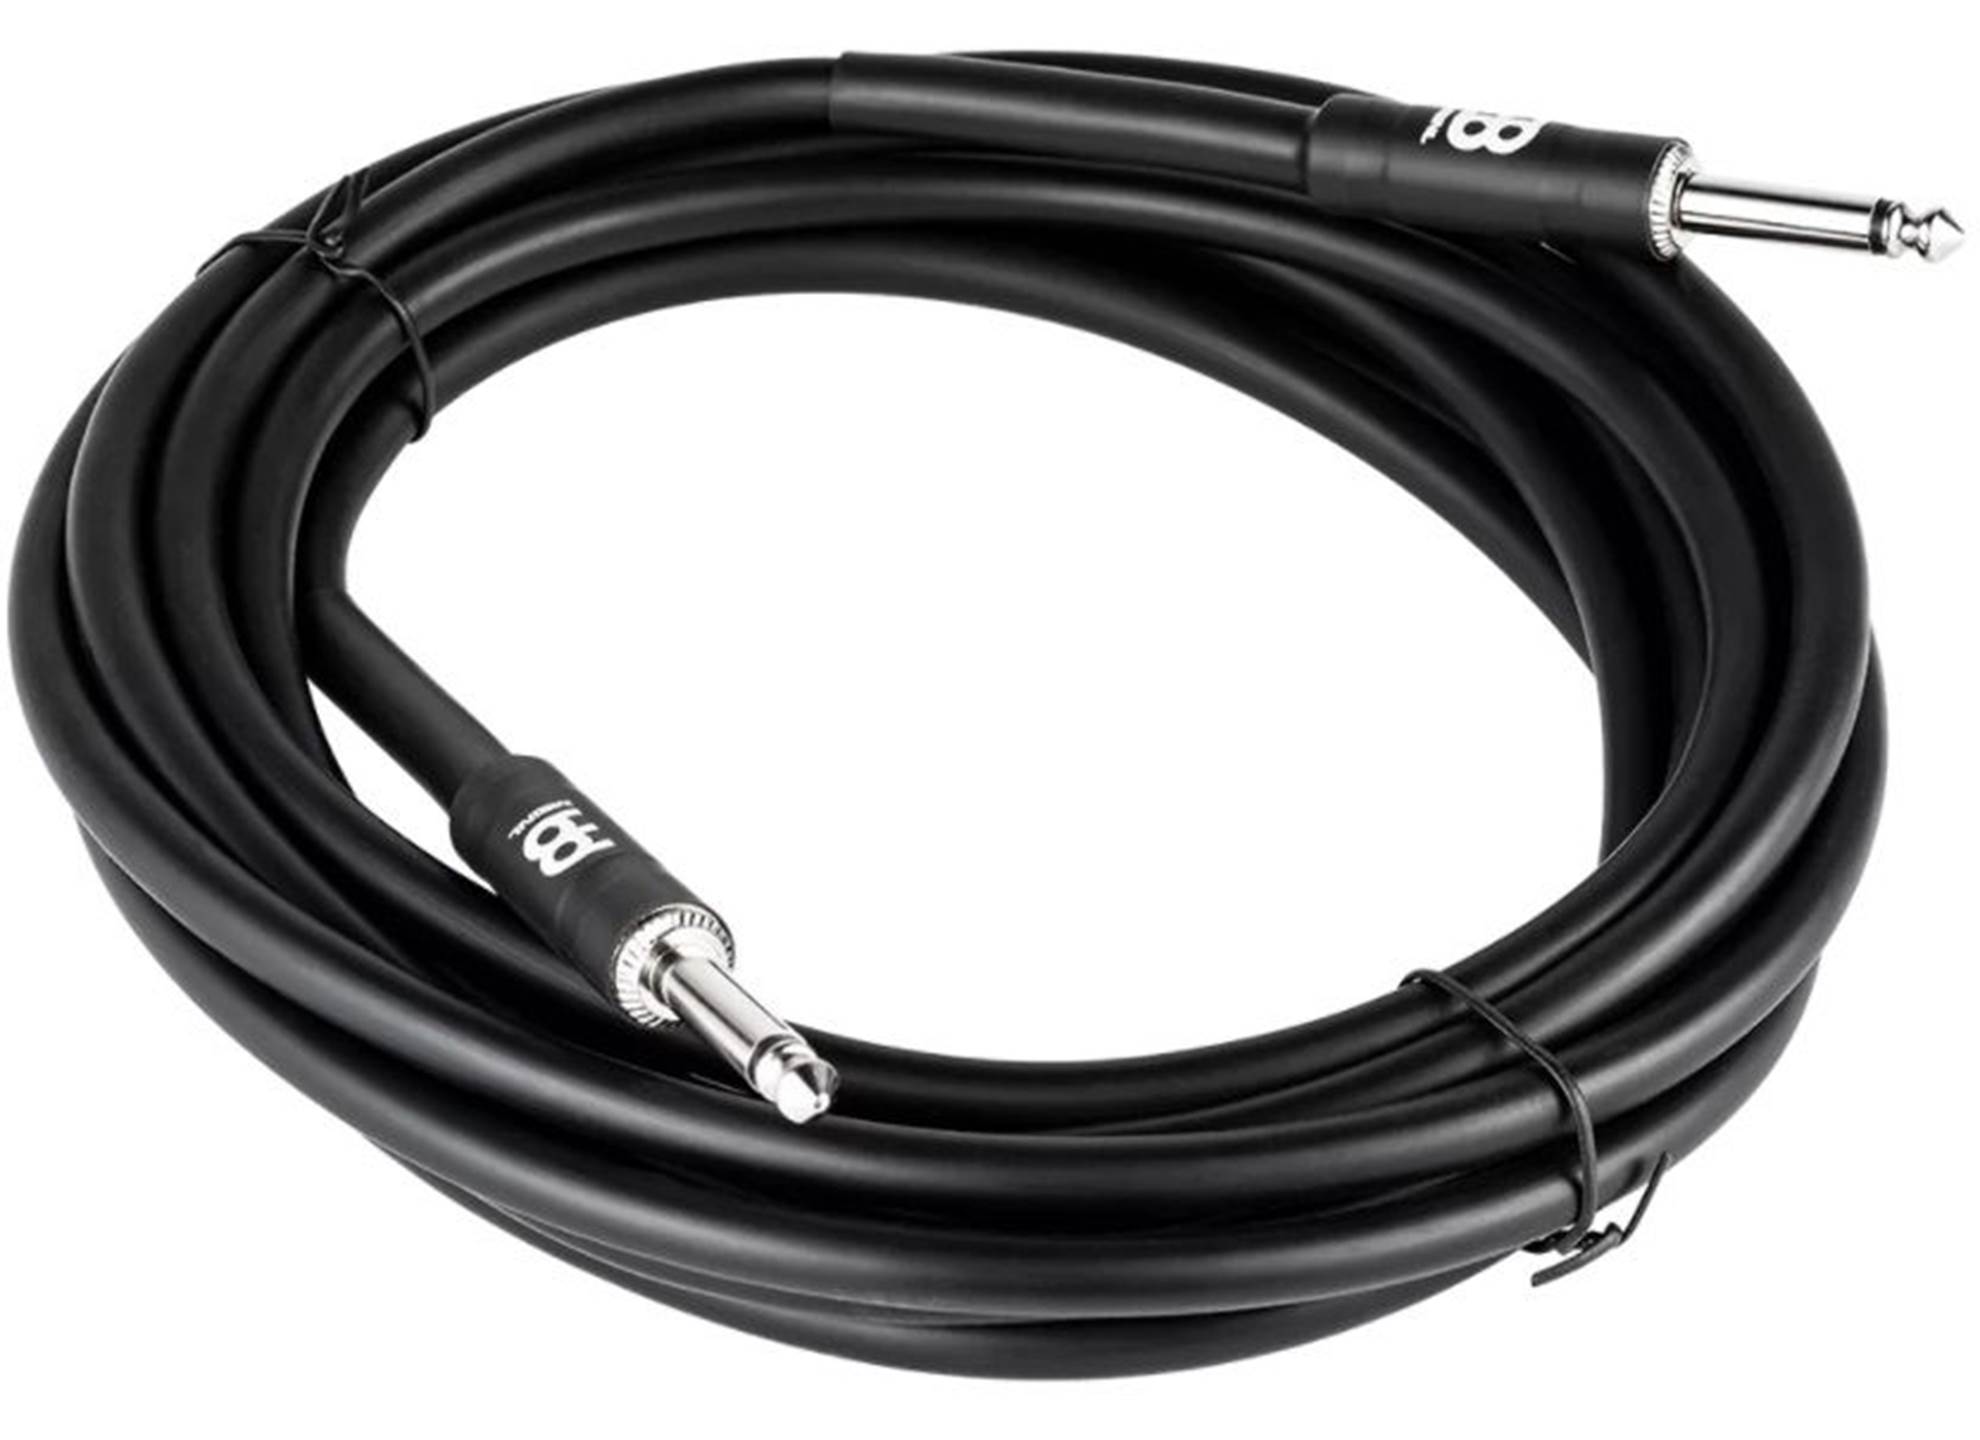 MPIC-5 Meinl Percussion 5ft Instrument Cable 1.5 meter